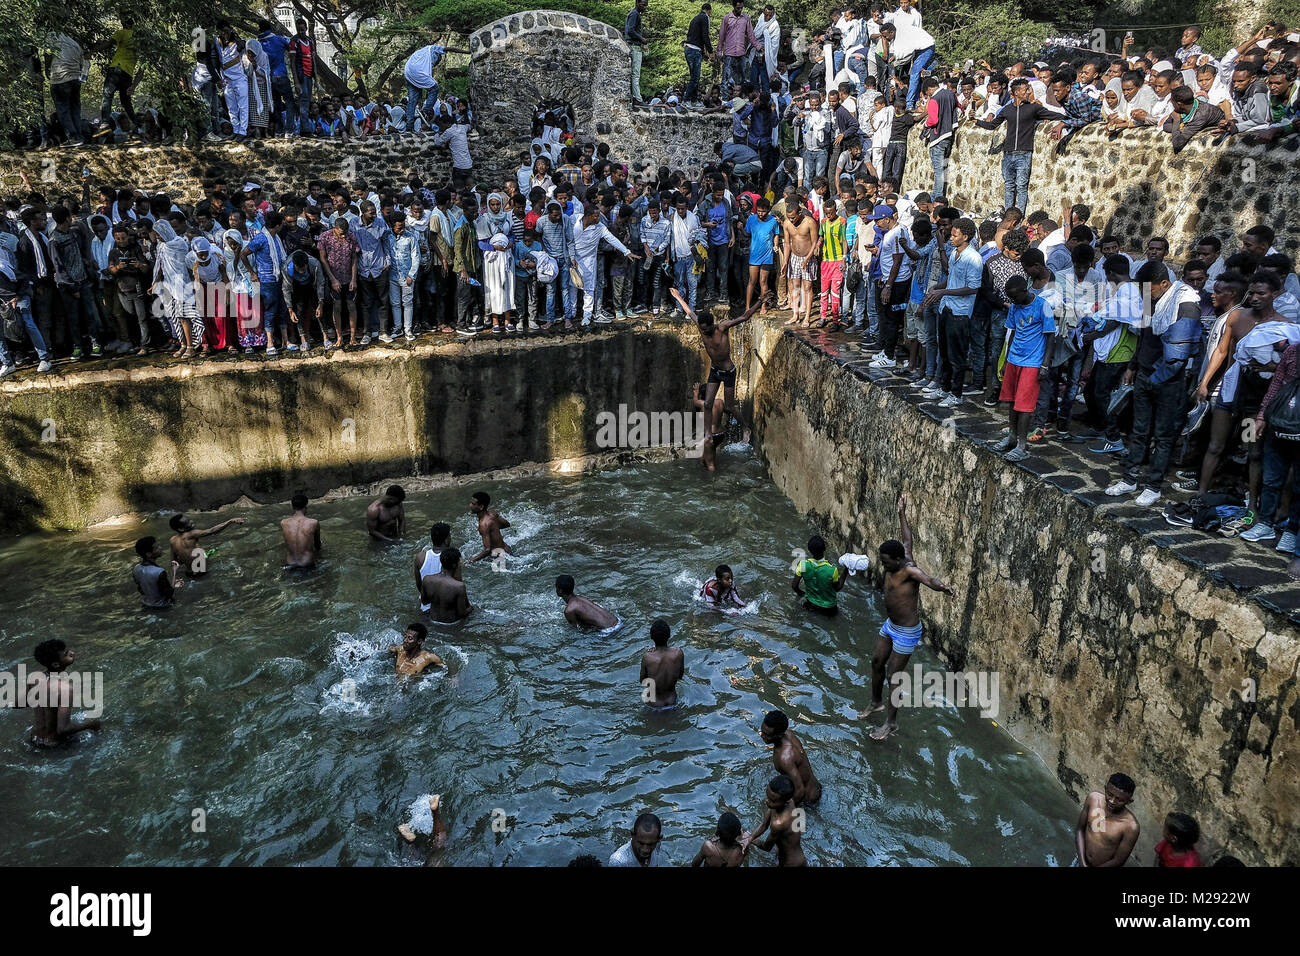 January 19, 2018 - Gondar, Amhara Region, Ethiopia - Pilgrims bathing in the waters of the Fasilides Baths..The annual Timkat festival, an Orthodox Christian celebration of Epiphany, remembers the baptism of Jesus in the Jordan river. During the festival, tabots, models of the Ark of the Covenant, are taken from churches around the city of Gondar and paraded through the streets to Fasilides Bath. Where finally the pilgrims end up bathing in the water blessed by the priests. (Credit Image: © Oscar Espinosa/SOPA via ZUMA Wire) Stock Photo